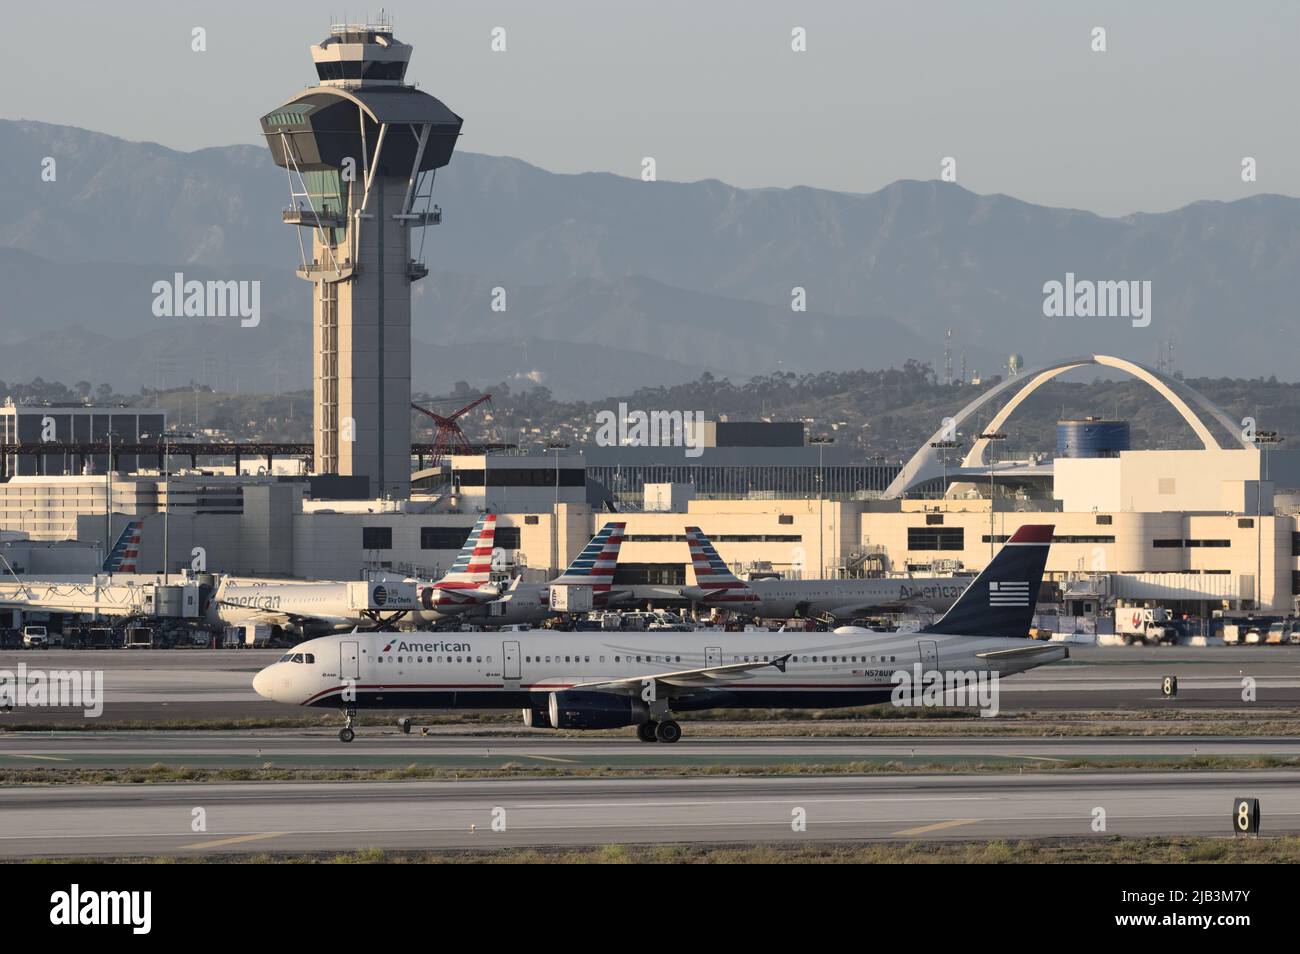 American Airlines Airbus A321-231 with registration N578UW shown taxiing at Los Angeles International Airport, California, USA on April 23, 2022: Stock Photo